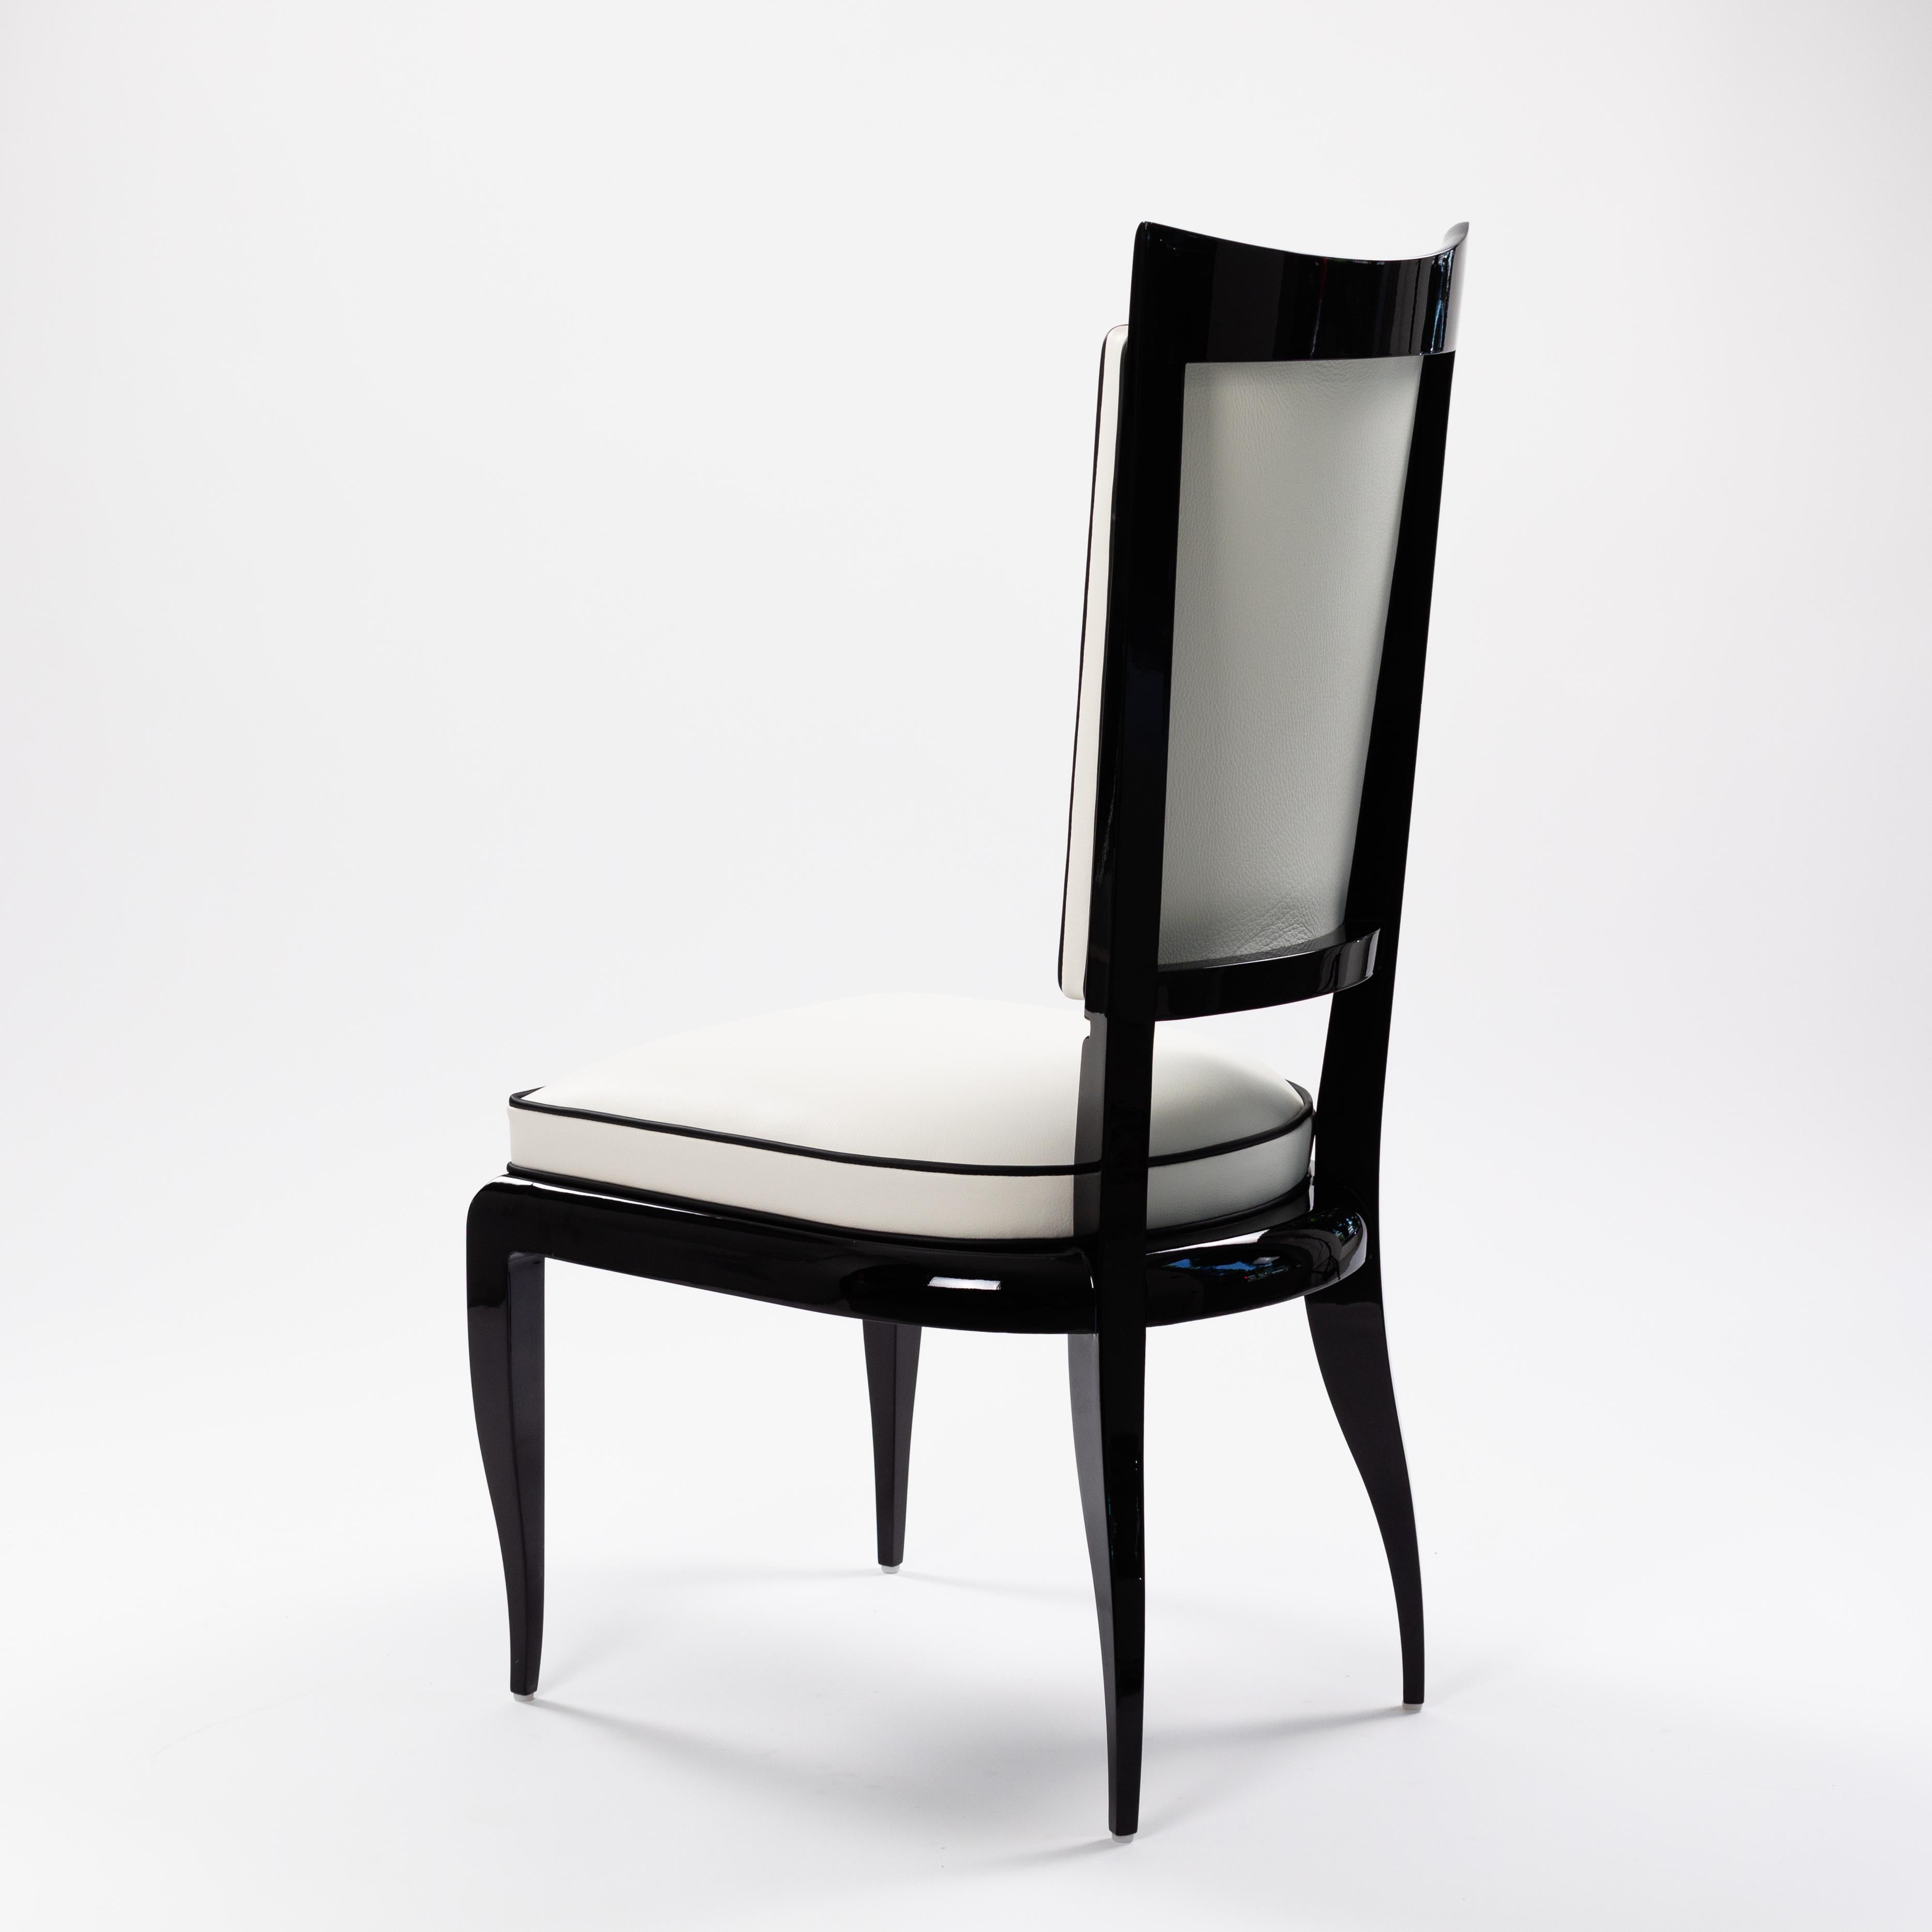 Elegant High Back Art Déco Dining Room Chair Black Lacquer White Nappa Leather In New Condition For Sale In Salzburg, AT